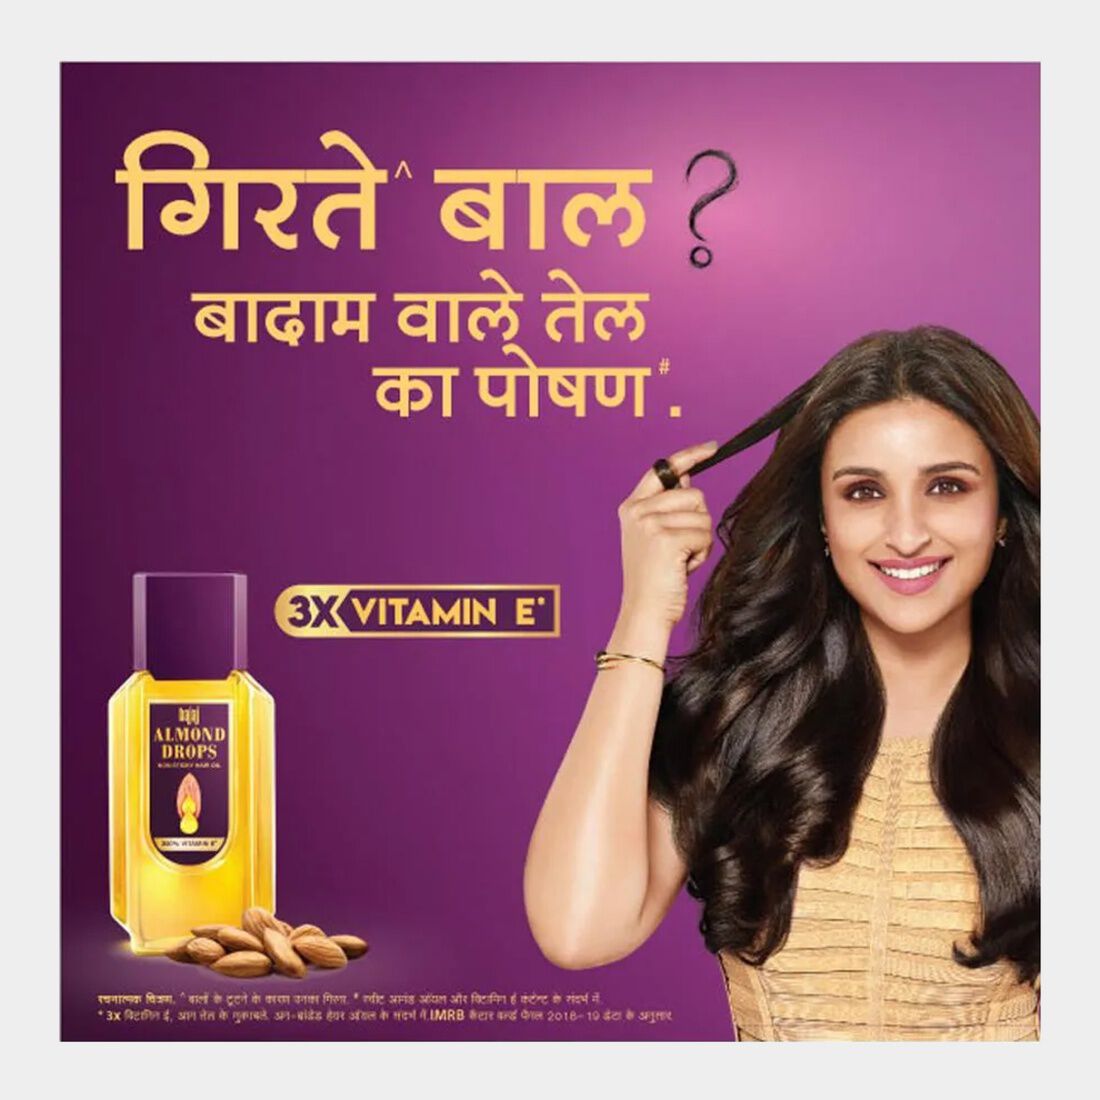 Bajaj Almond Drops adds style to the substance in its new campaign  conceived by Mullen Lintas